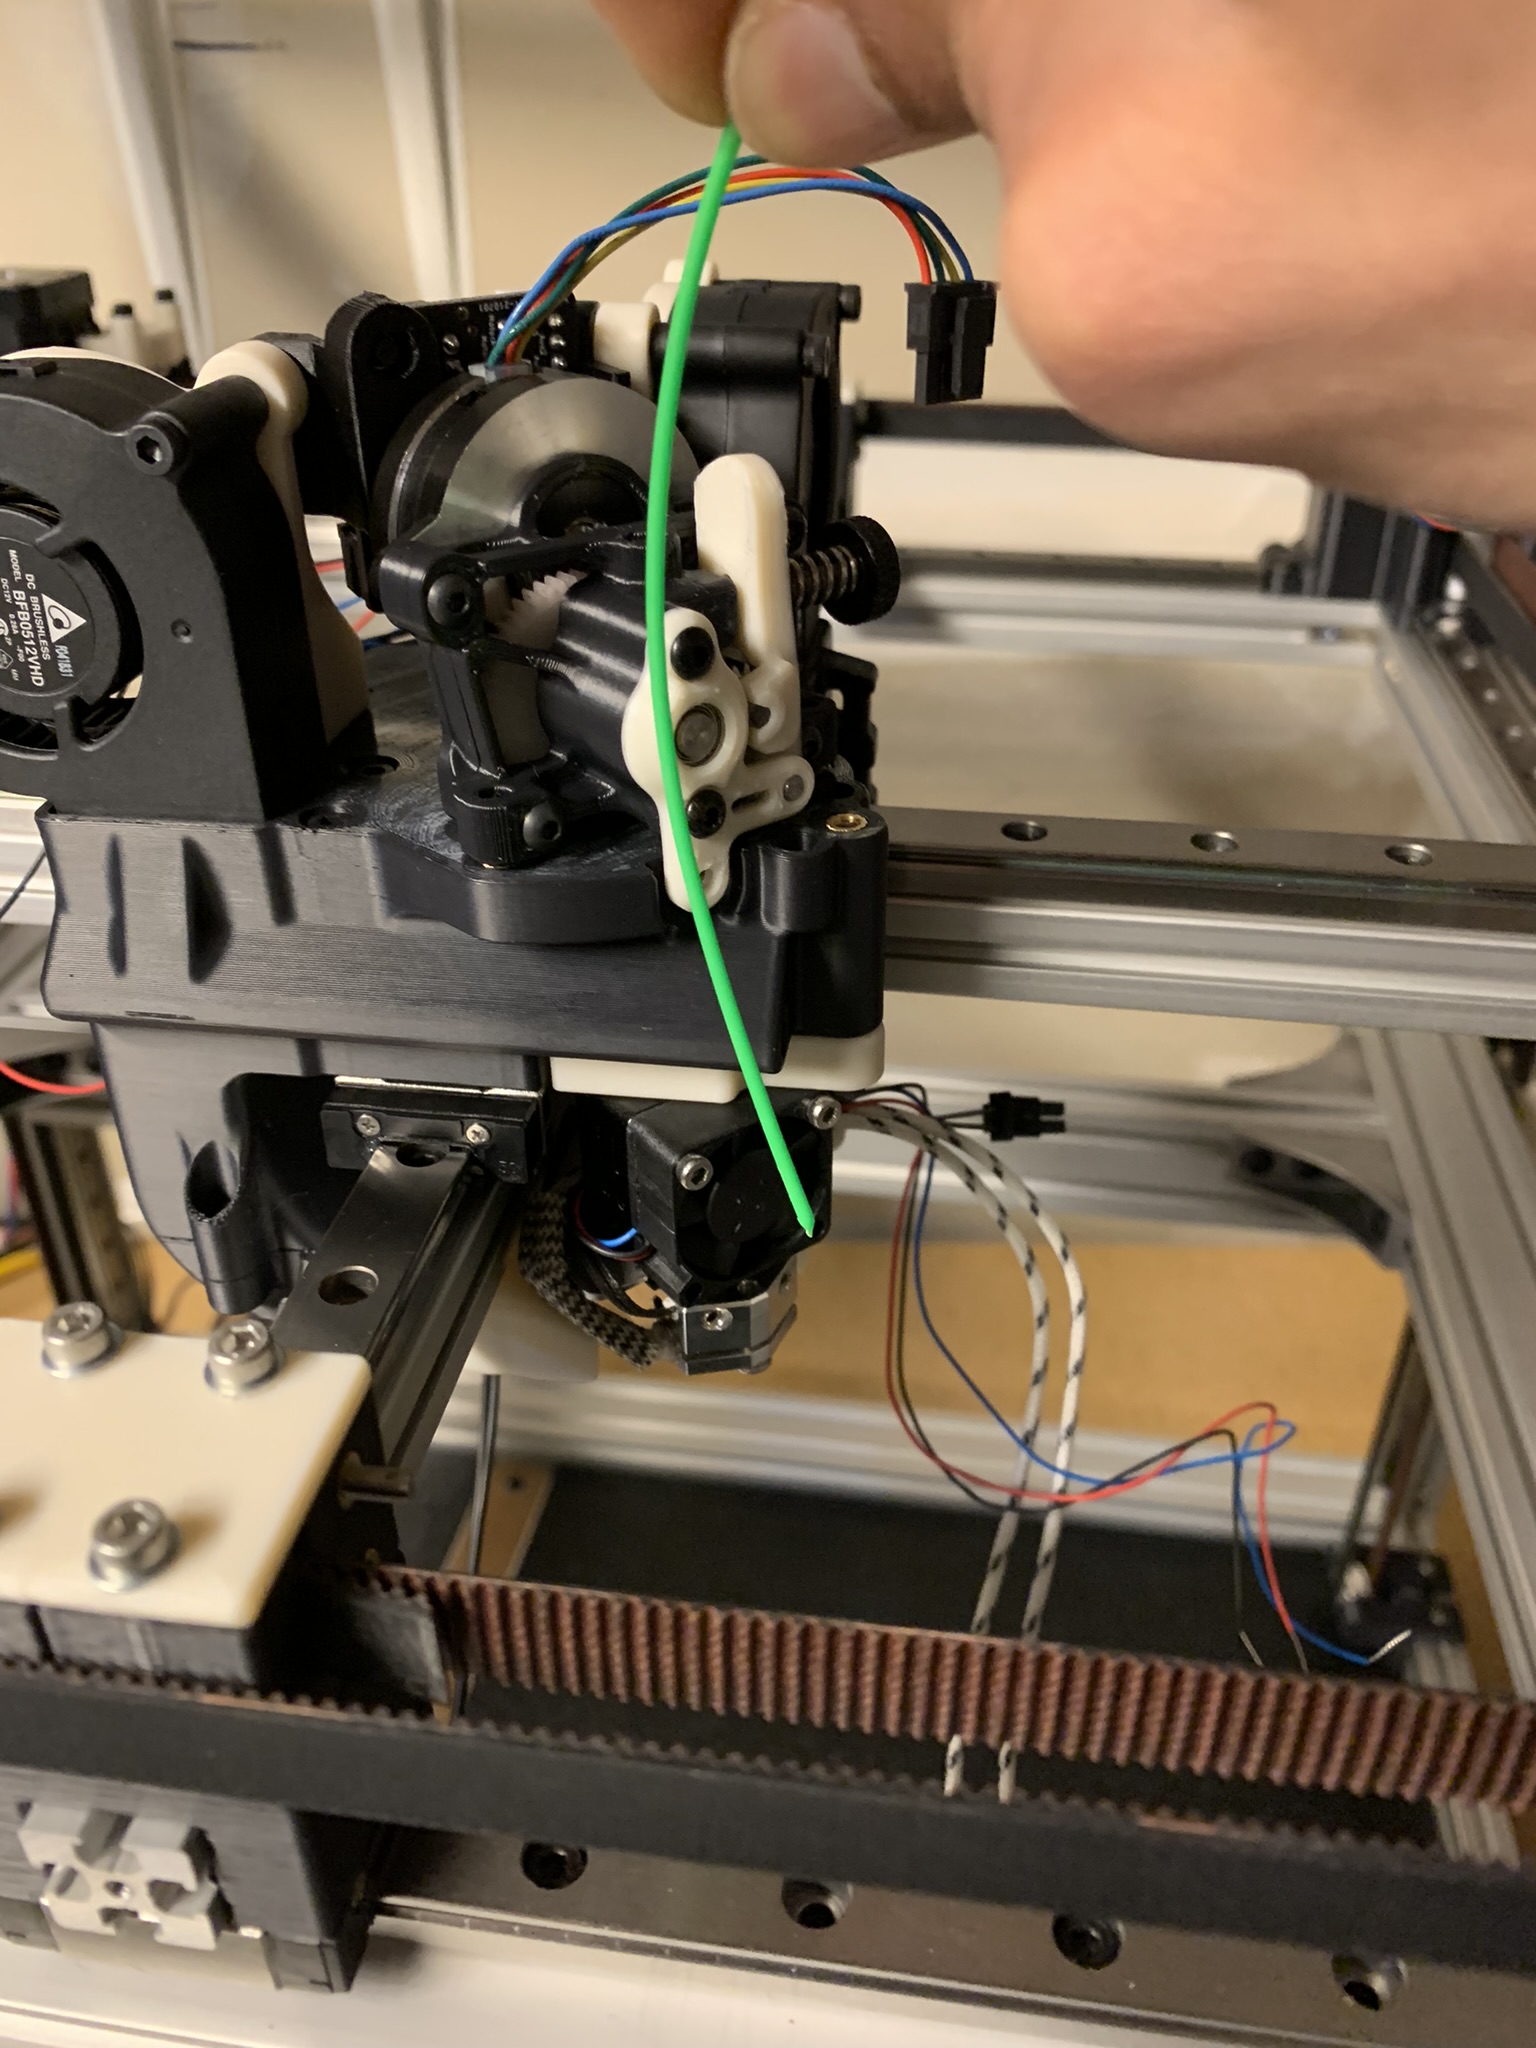 Length of filament fed into the extruder and toolhead